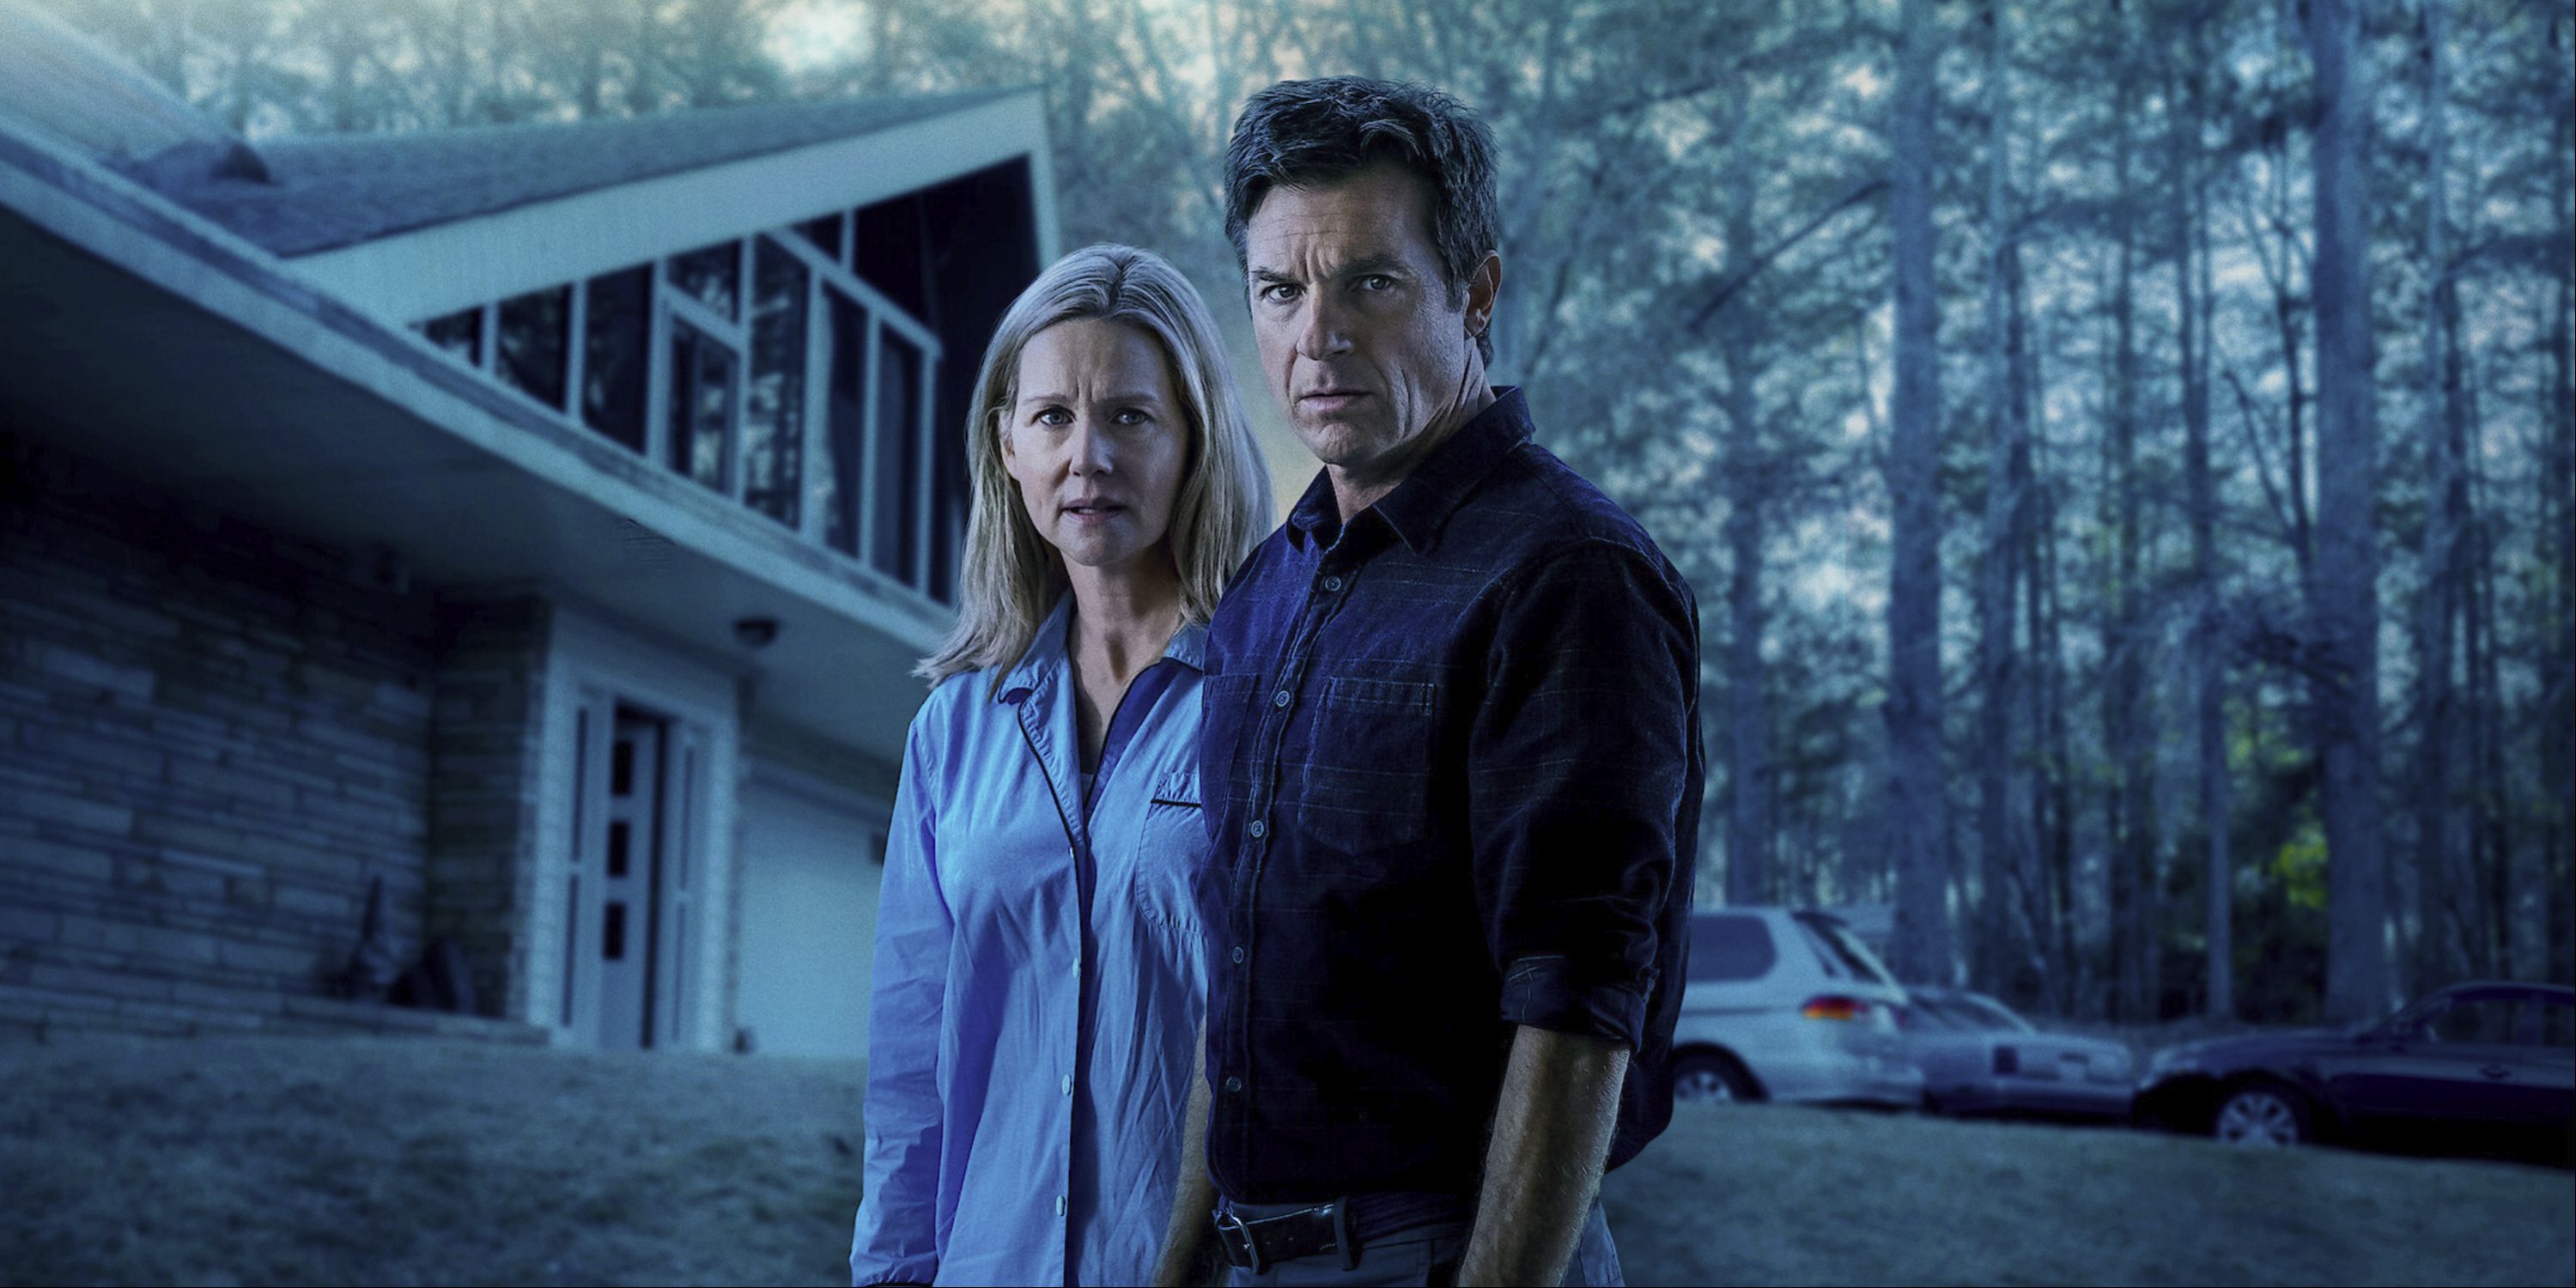 Jason Bateman as Marty Byrde and Laura Linney as Wendy Byrde standing in front of a house on the show Ozark